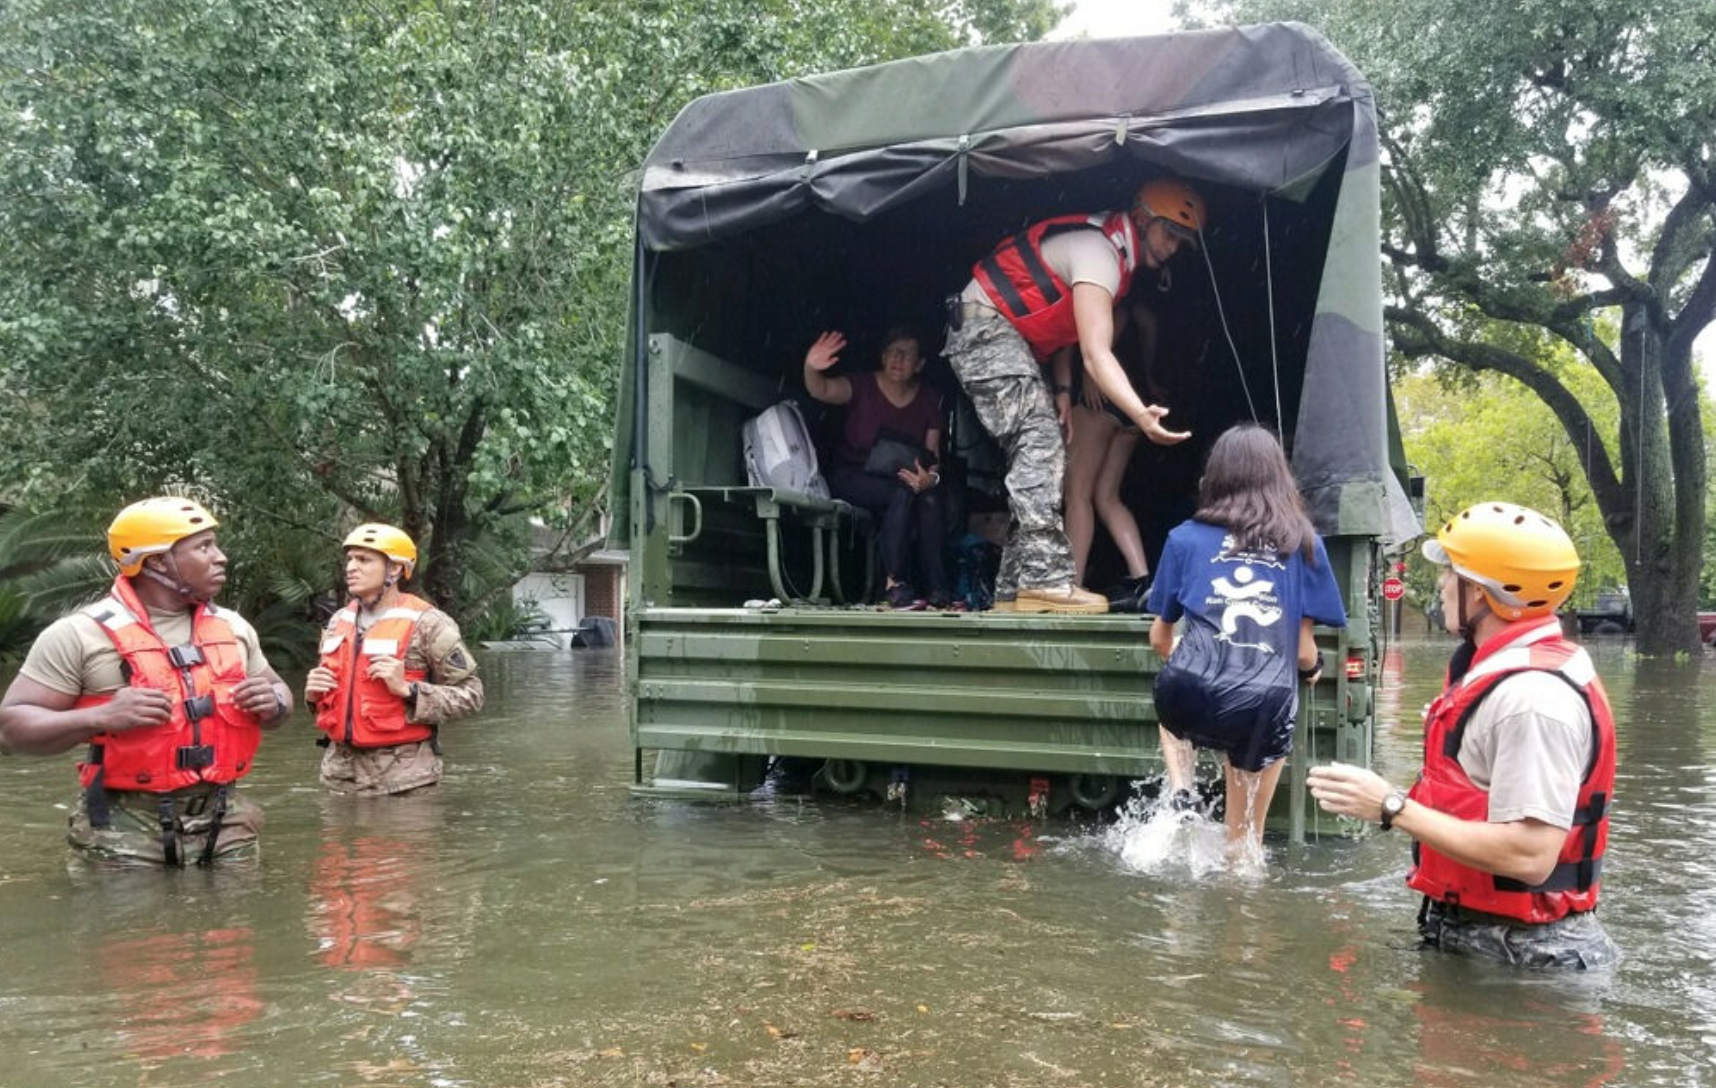 Man helping woman into a truck during a flood